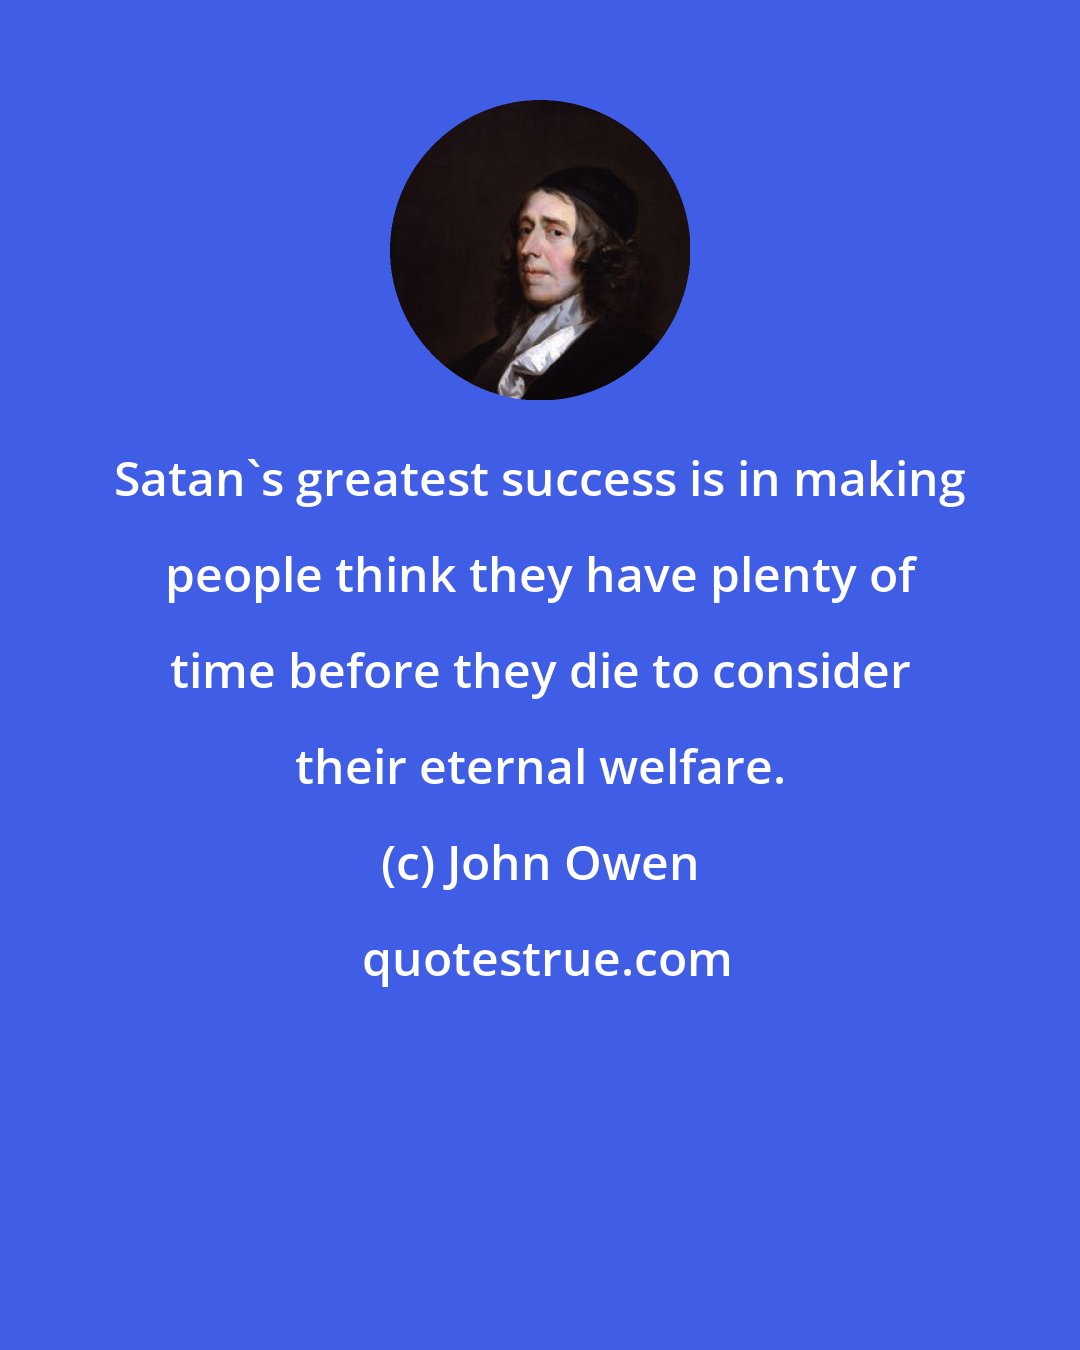 John Owen: Satan's greatest success is in making people think they have plenty of time before they die to consider their eternal welfare.